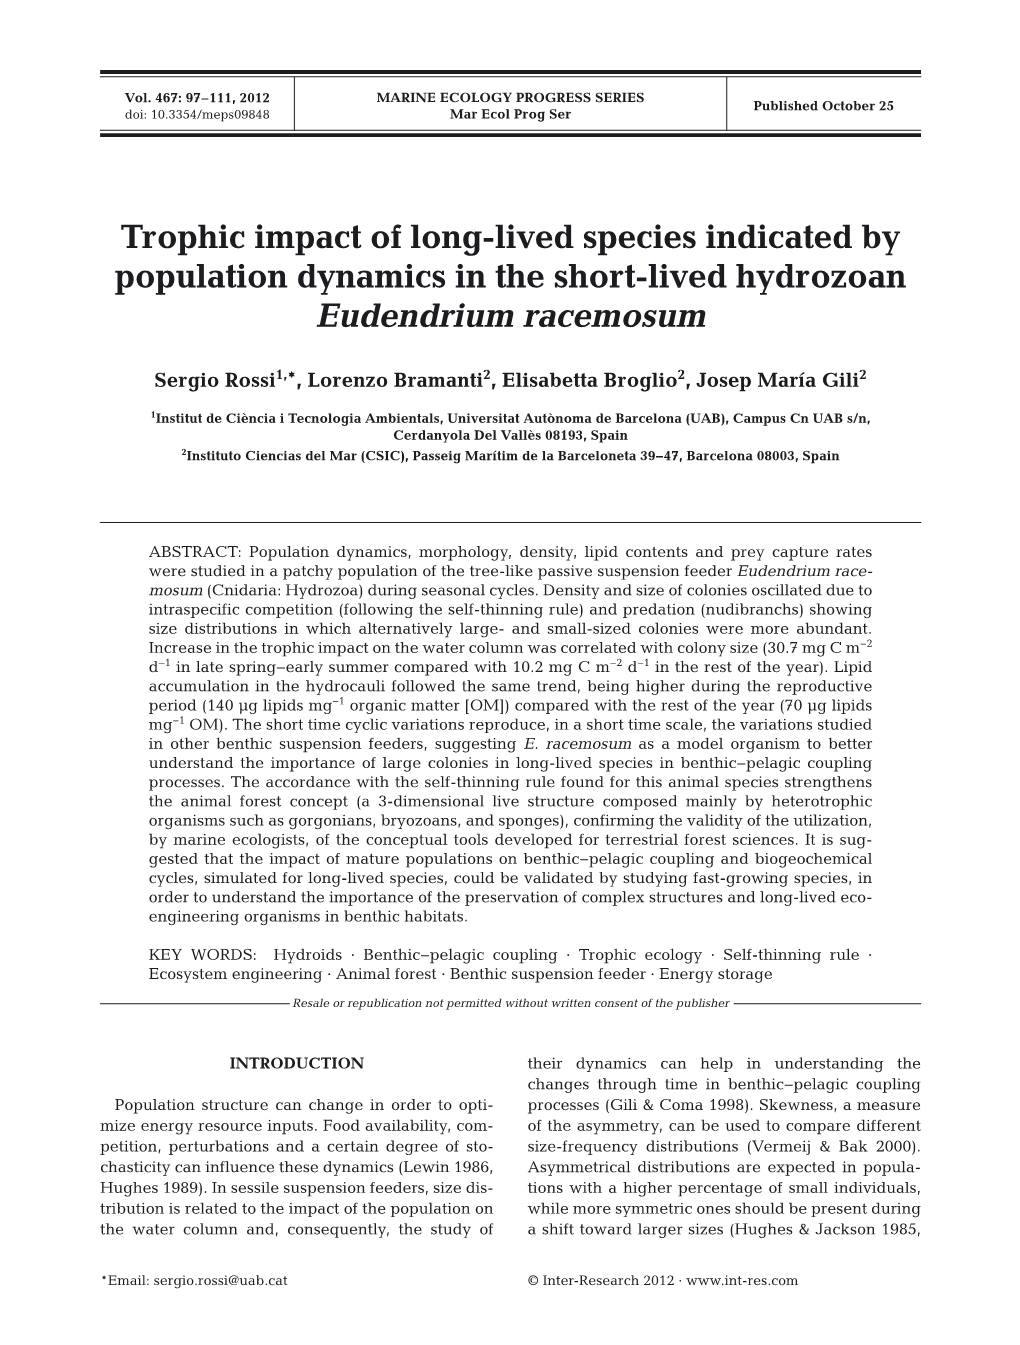 Trophic Impact of Long-Lived Species Indicated by Population Dynamics in the Short-Lived Hydrozoan Eudendrium Racemosum